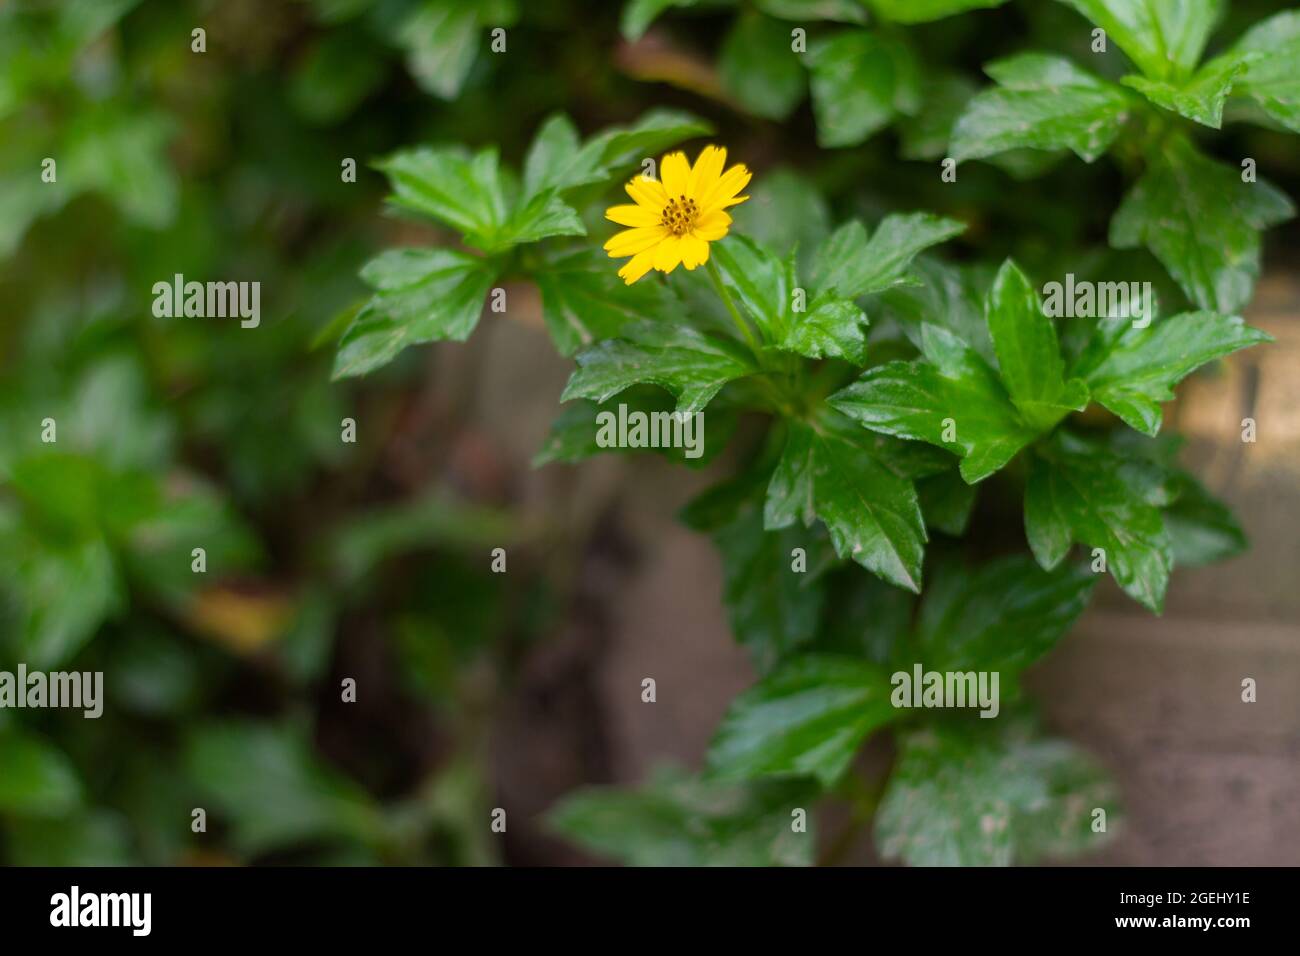 An expanse of a kind of creeping buttercup plant, Ranunculus repens, has green leaves with yellow flowers Stock Photo